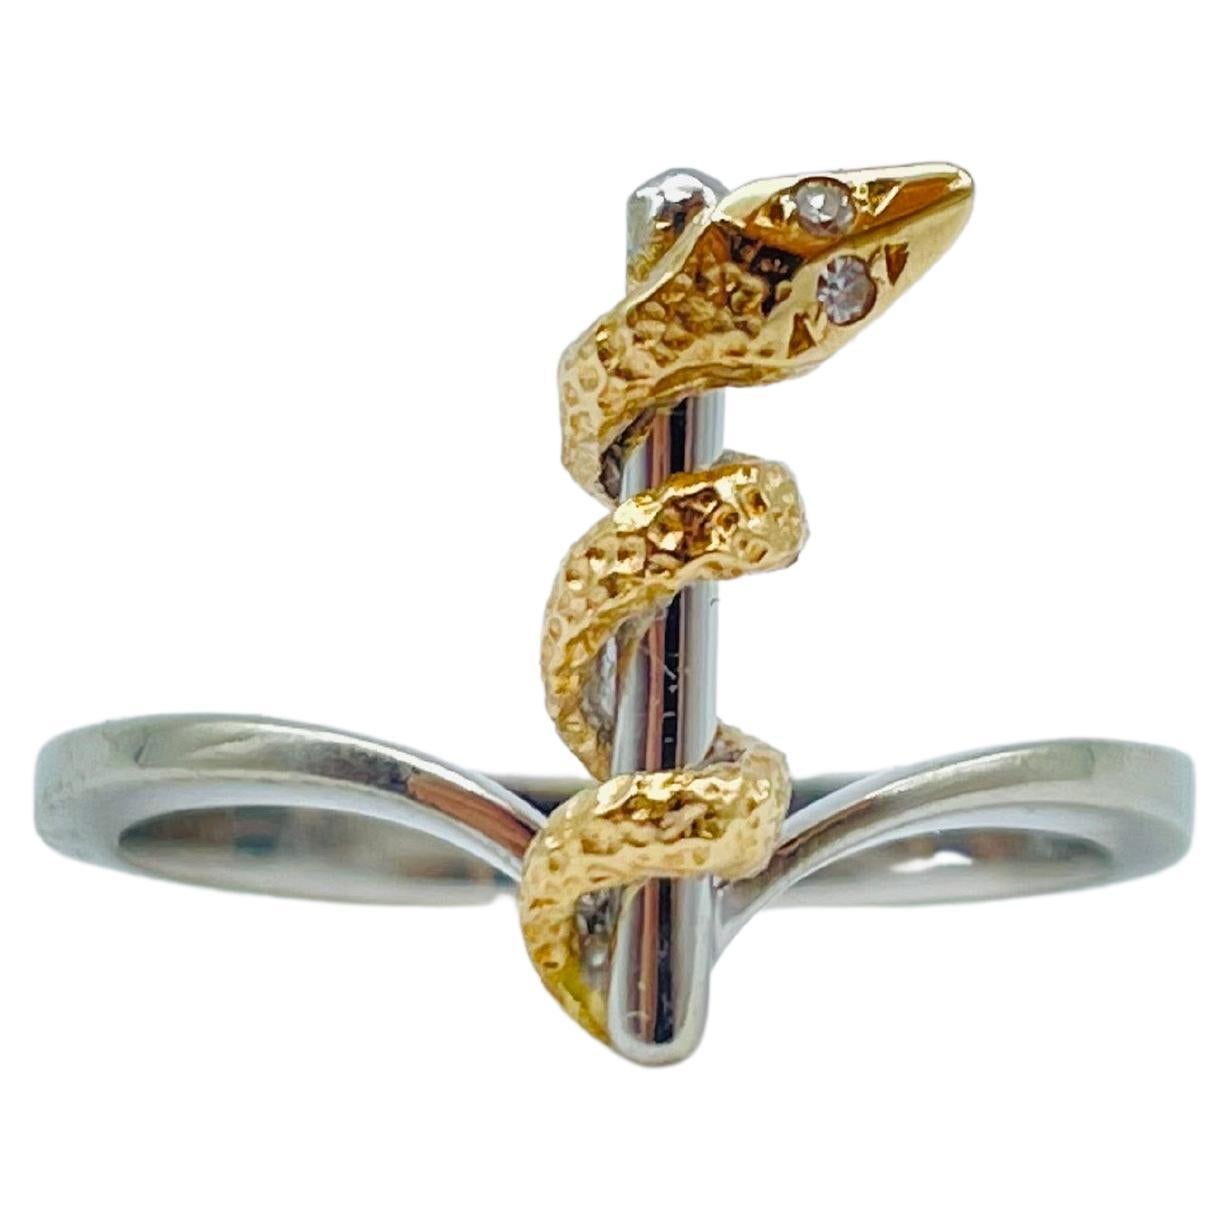 Unique and Elegant Snake Bicolor Ring with Diamond Eyes White/Yellow Gold 14k For Sale